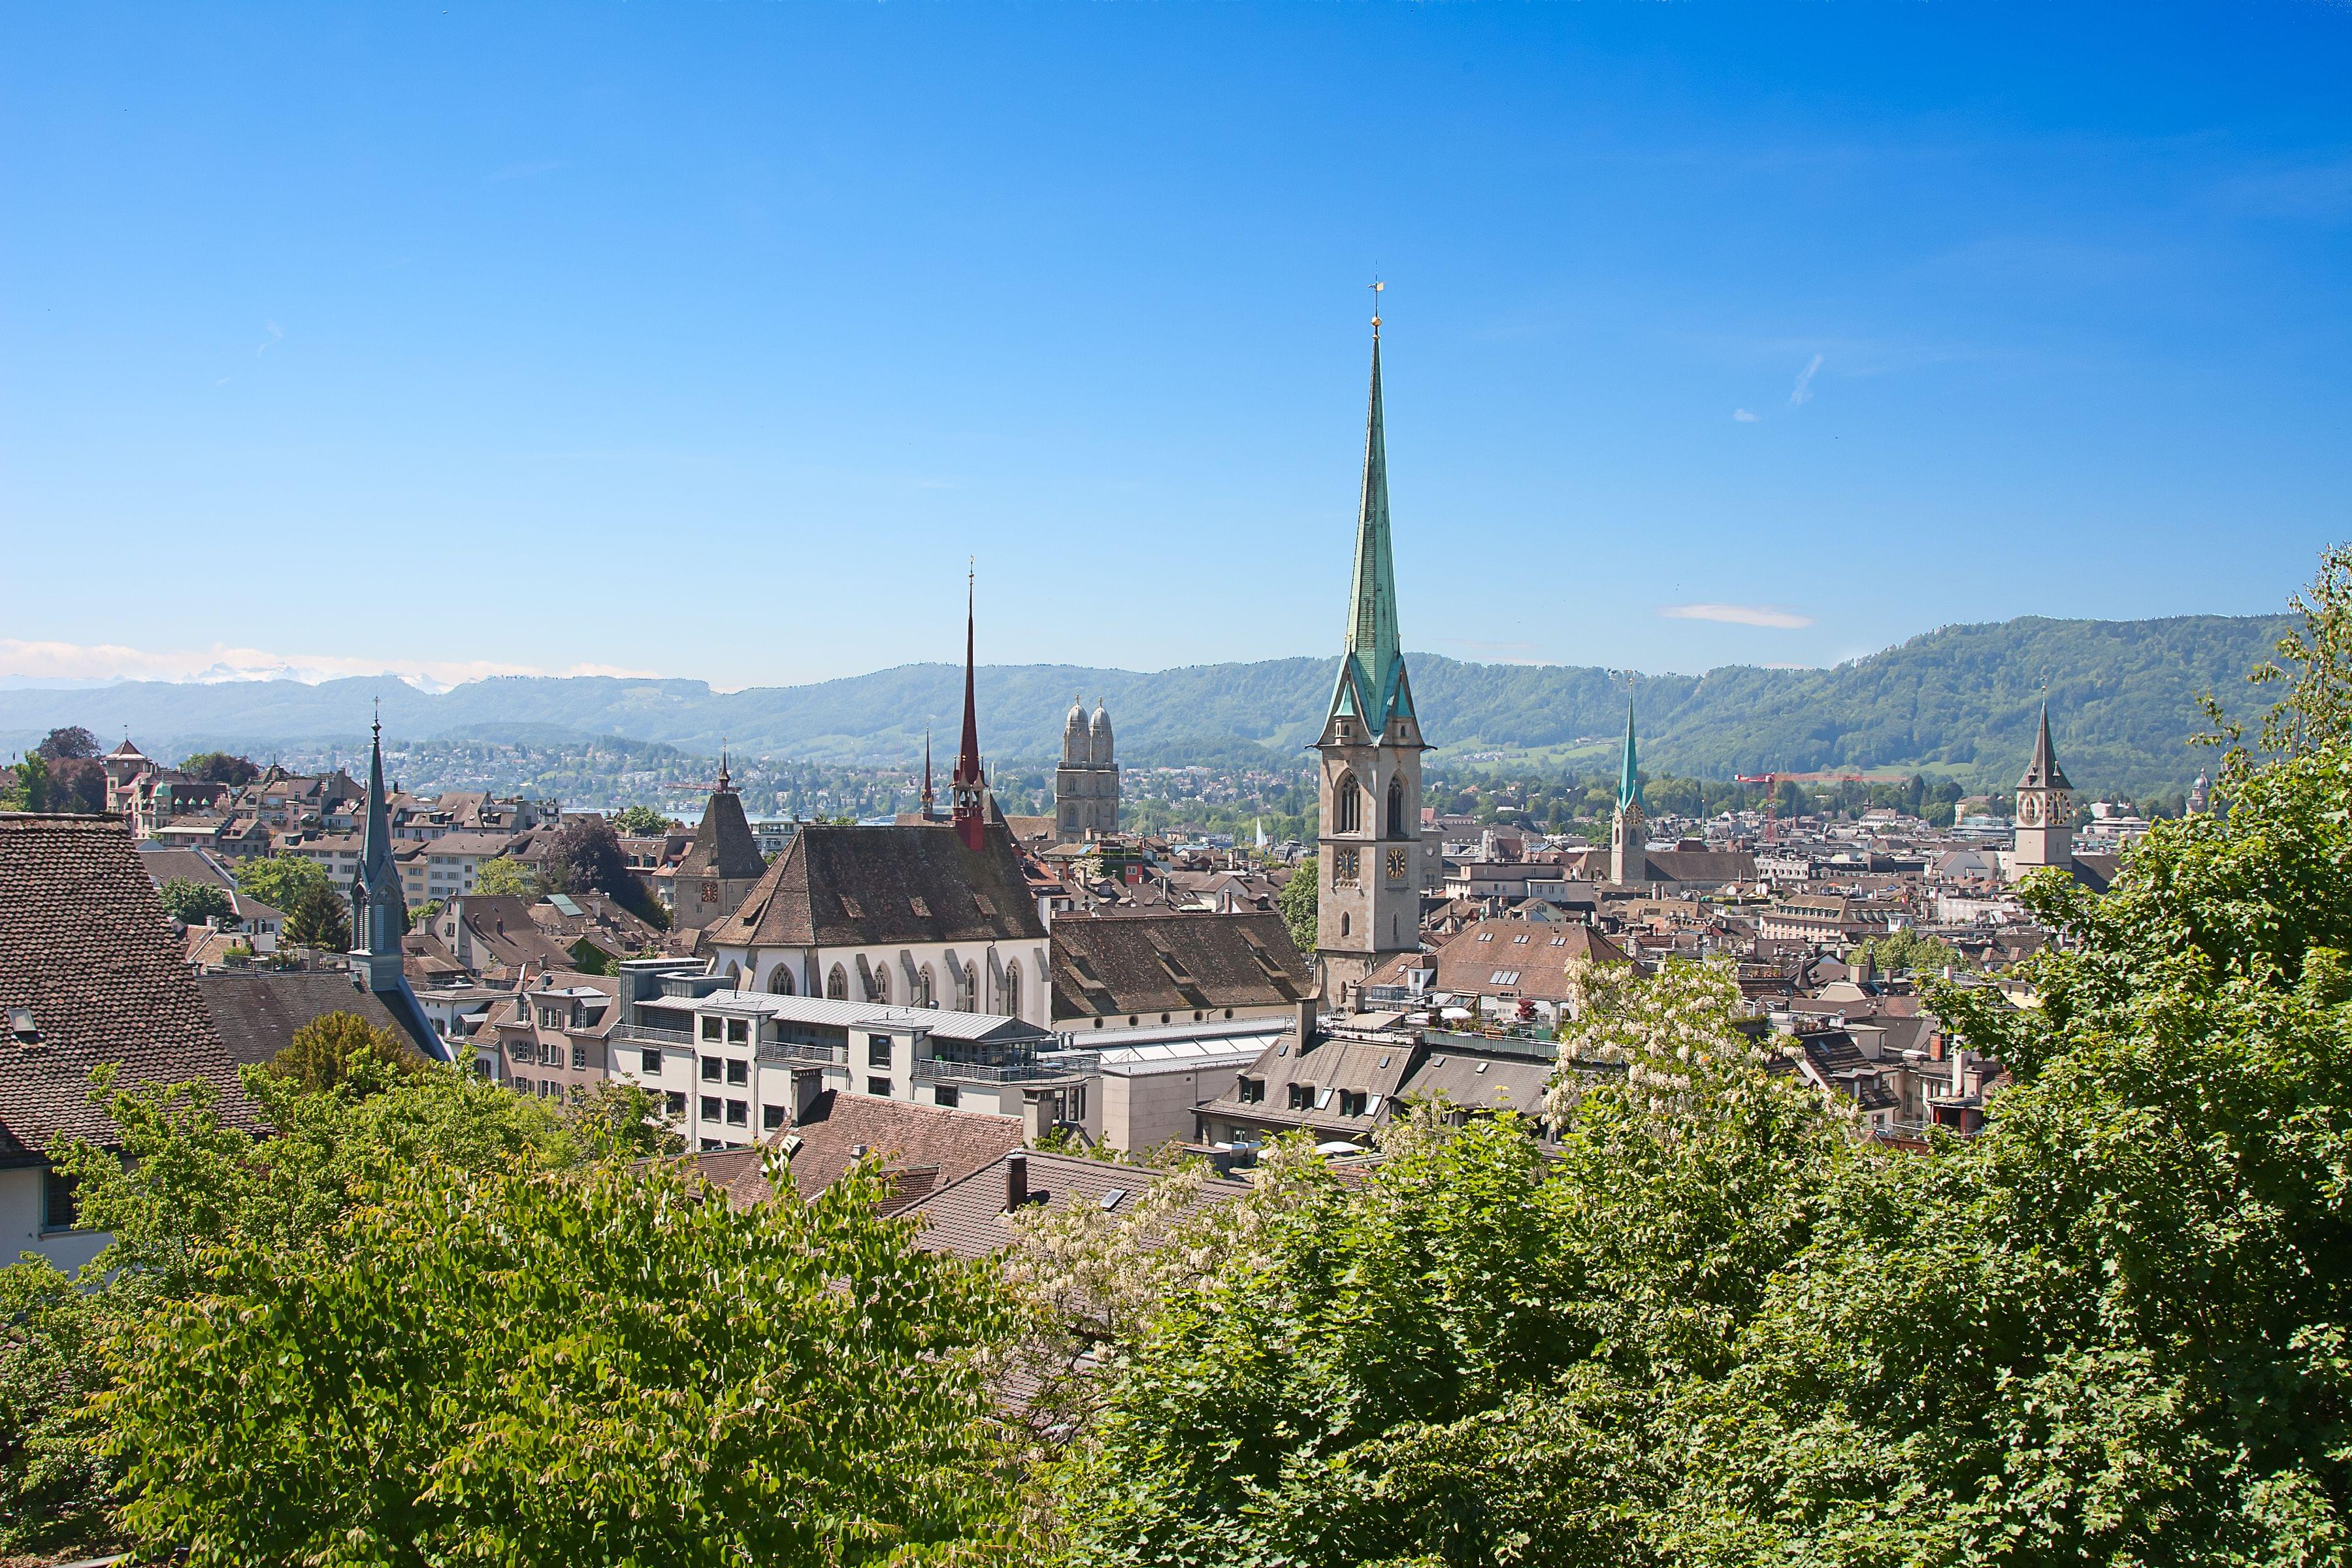 Zurich city greenery and buildings.jpg